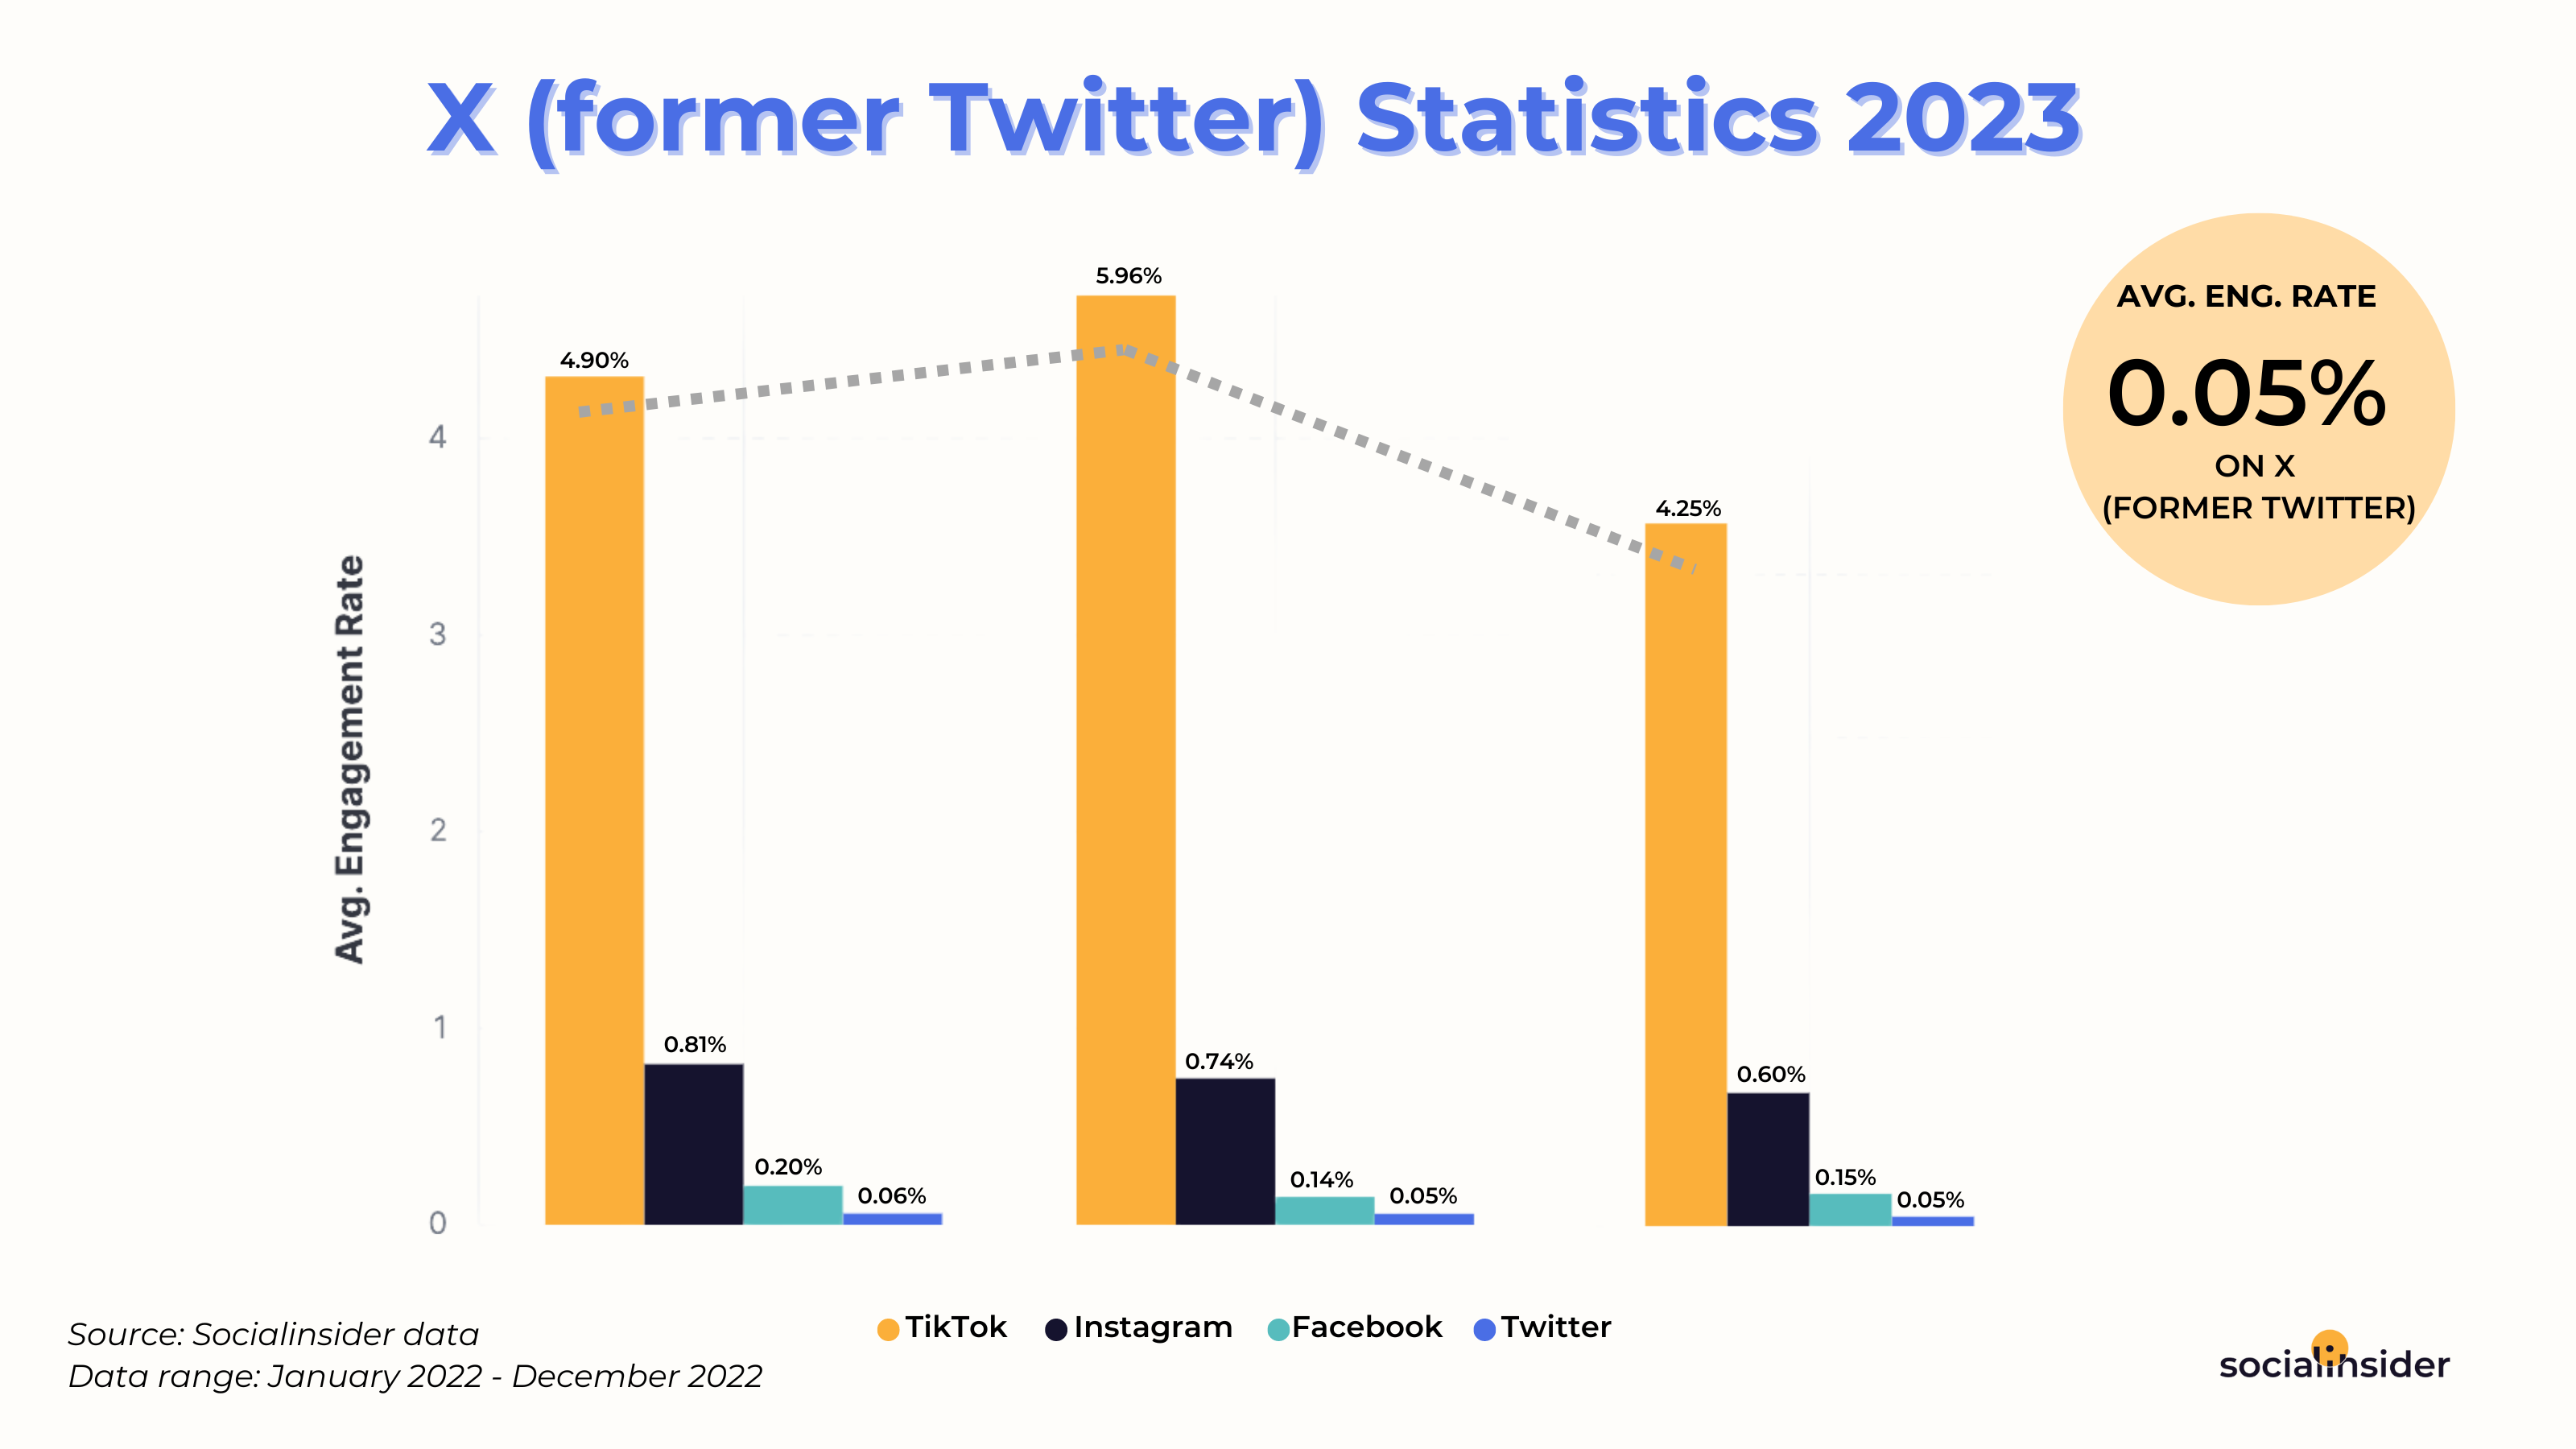 Twitter/X Software Reviews, Demo & Pricing - 2023